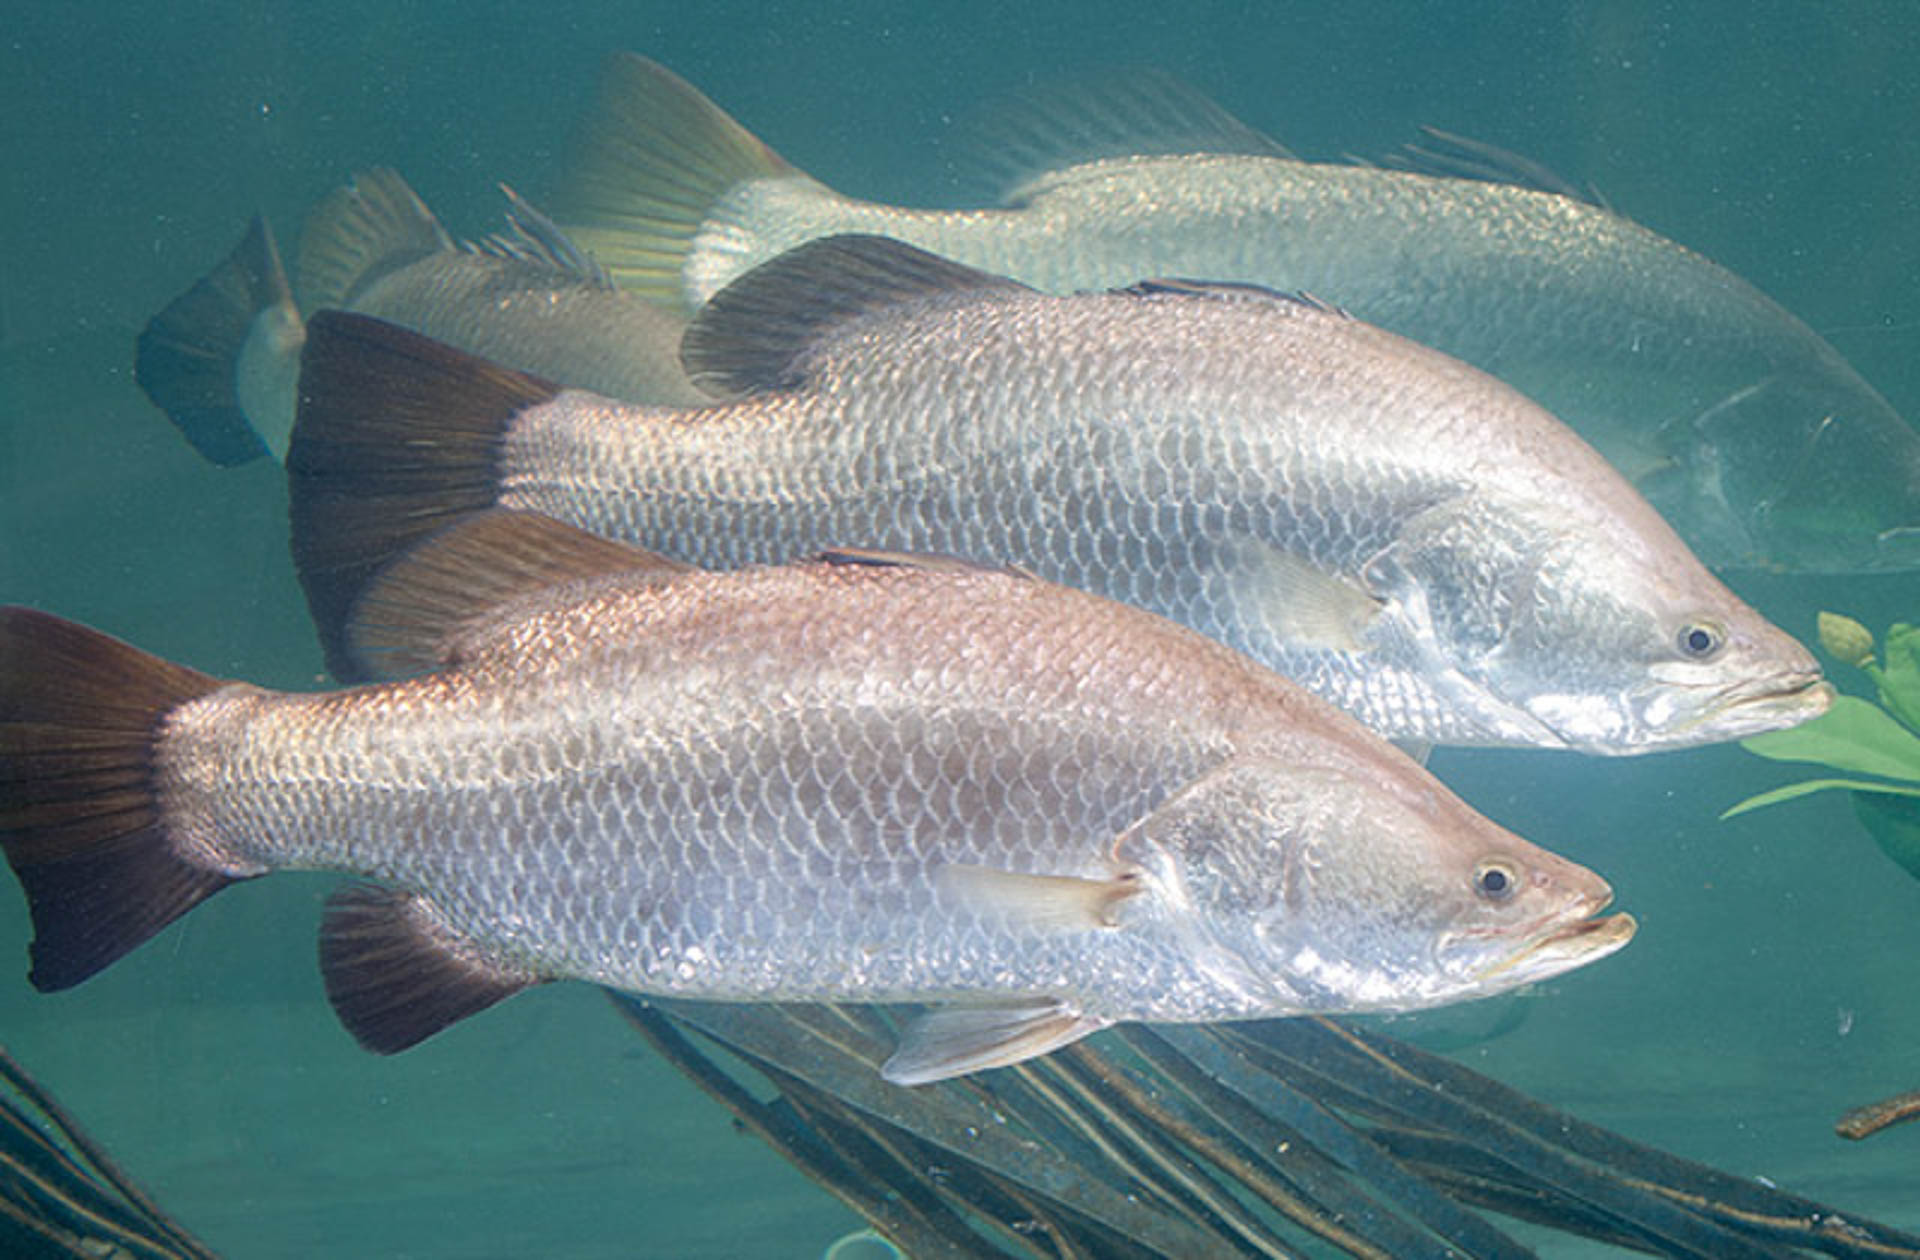 Sea Perch/Barramundi fish, one of the species that FishPac systems transports in its containers